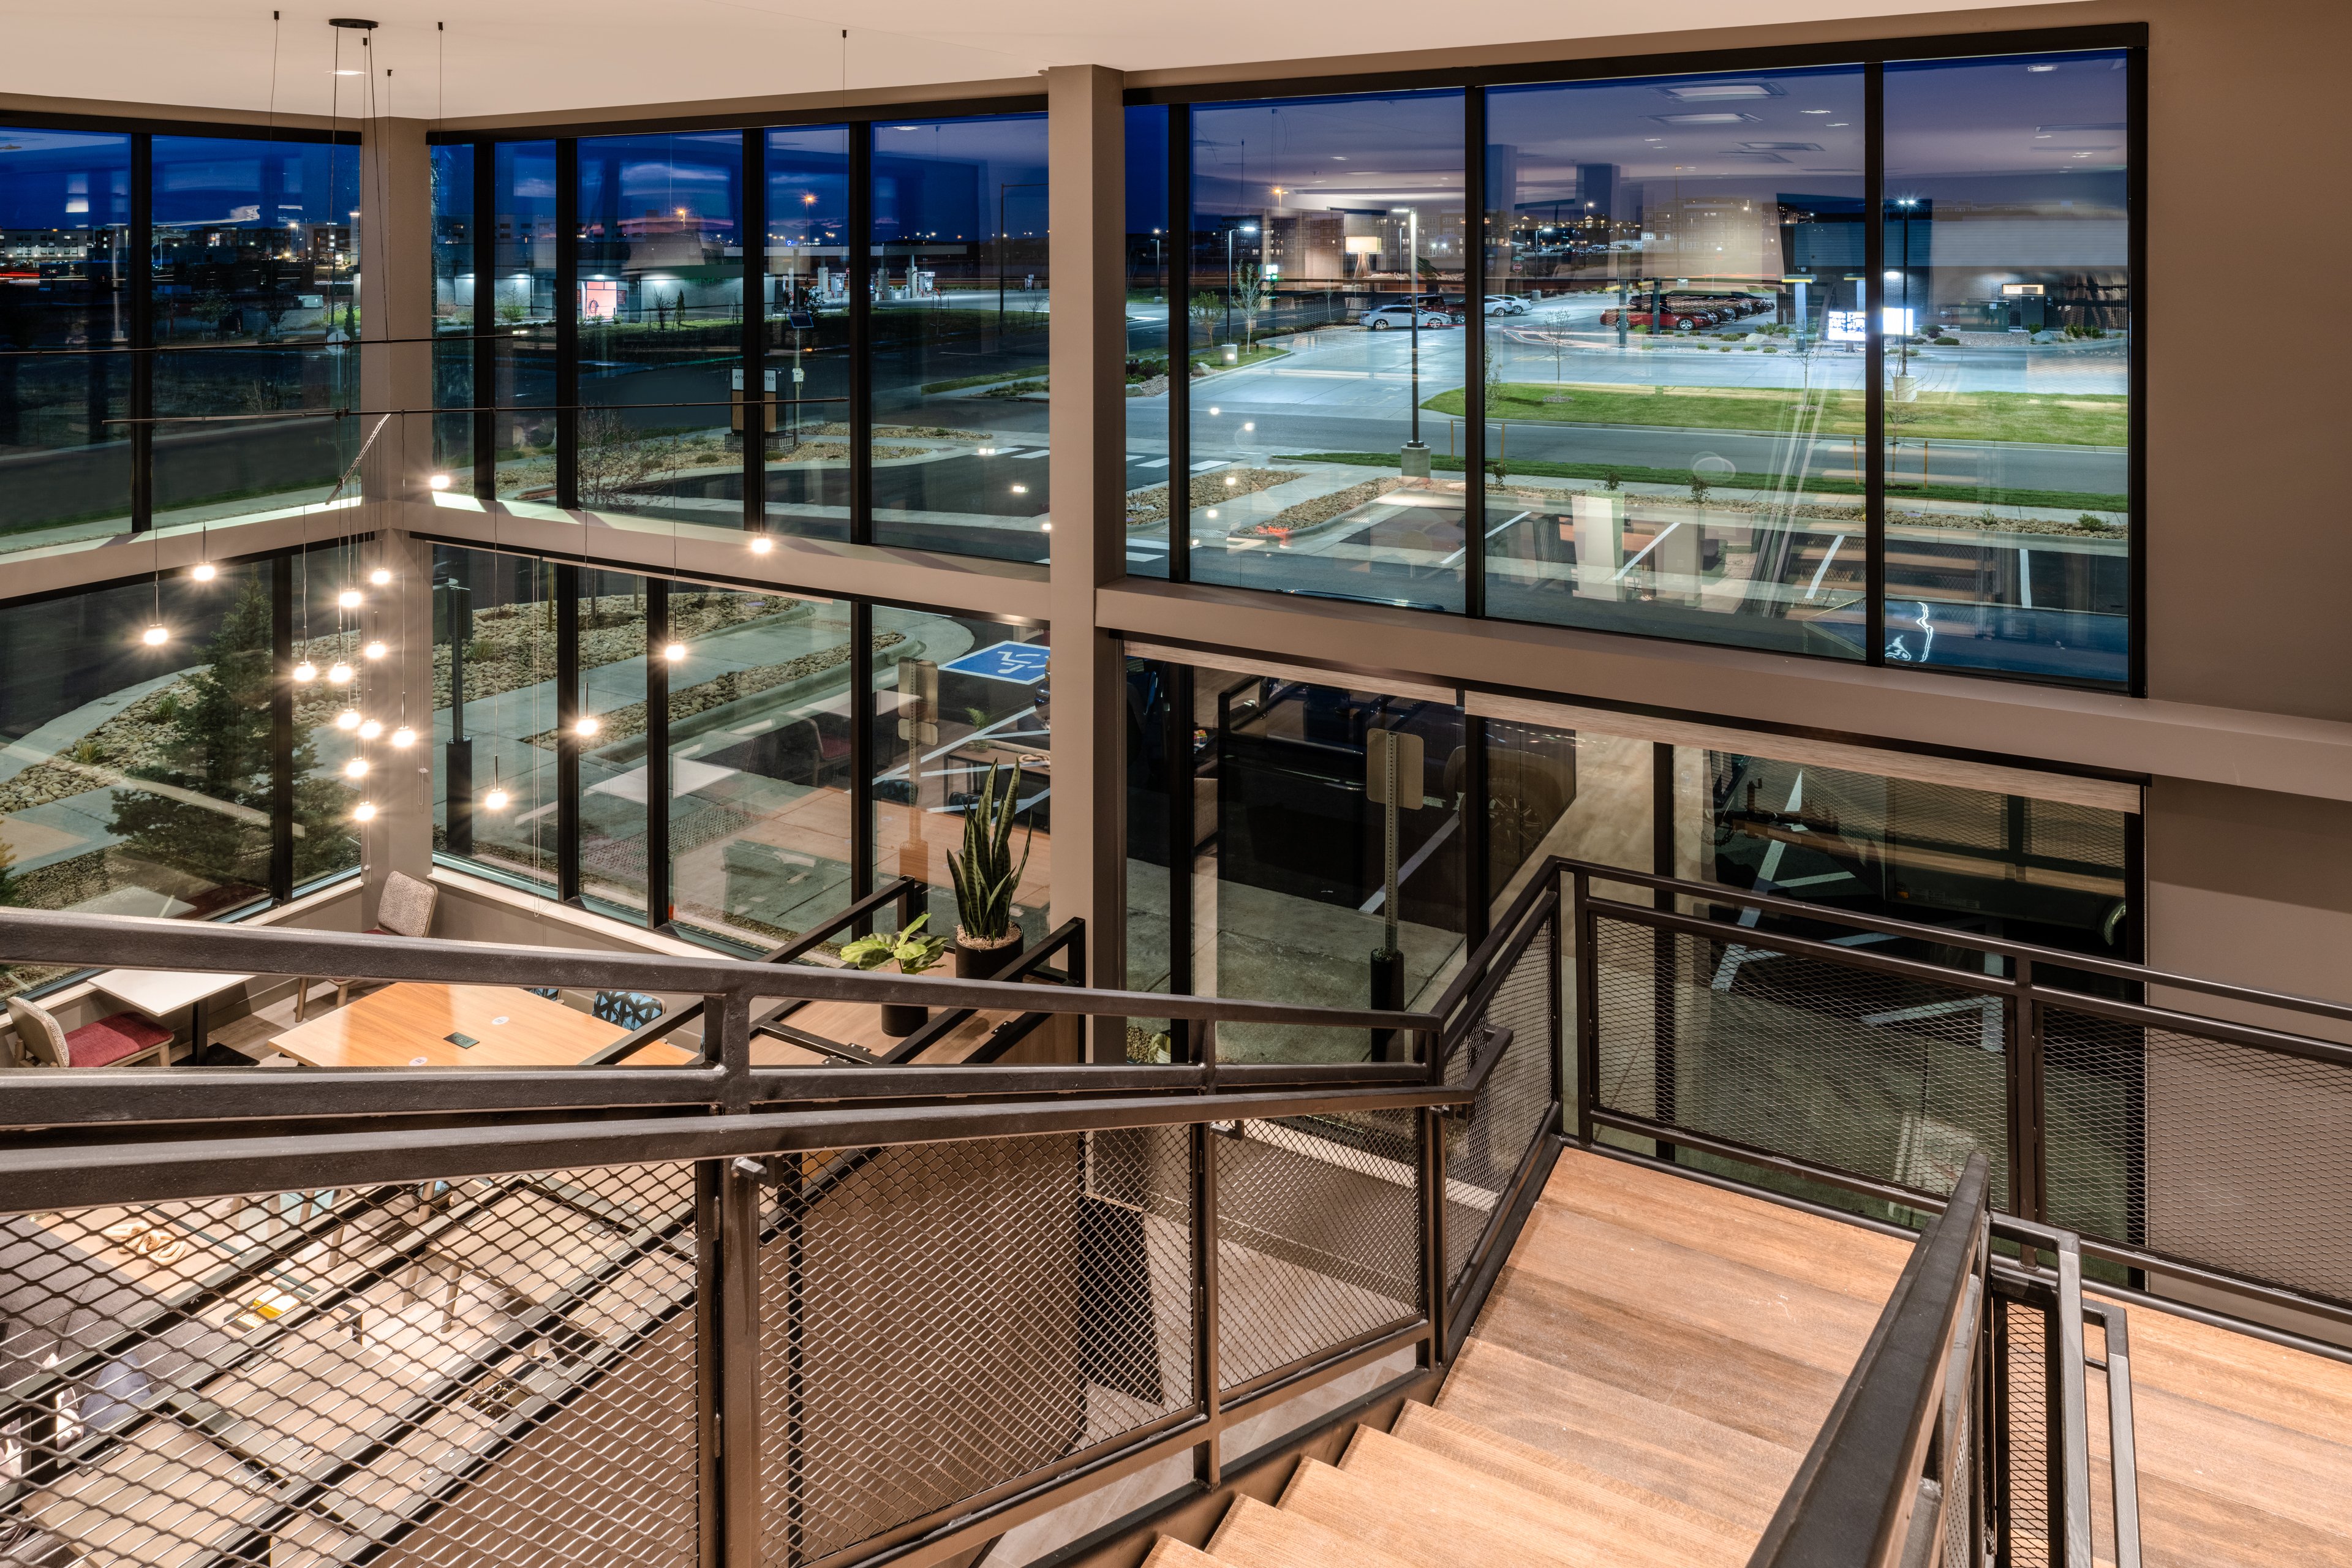 Enjoy large windows for an awesome view from our two story lobby